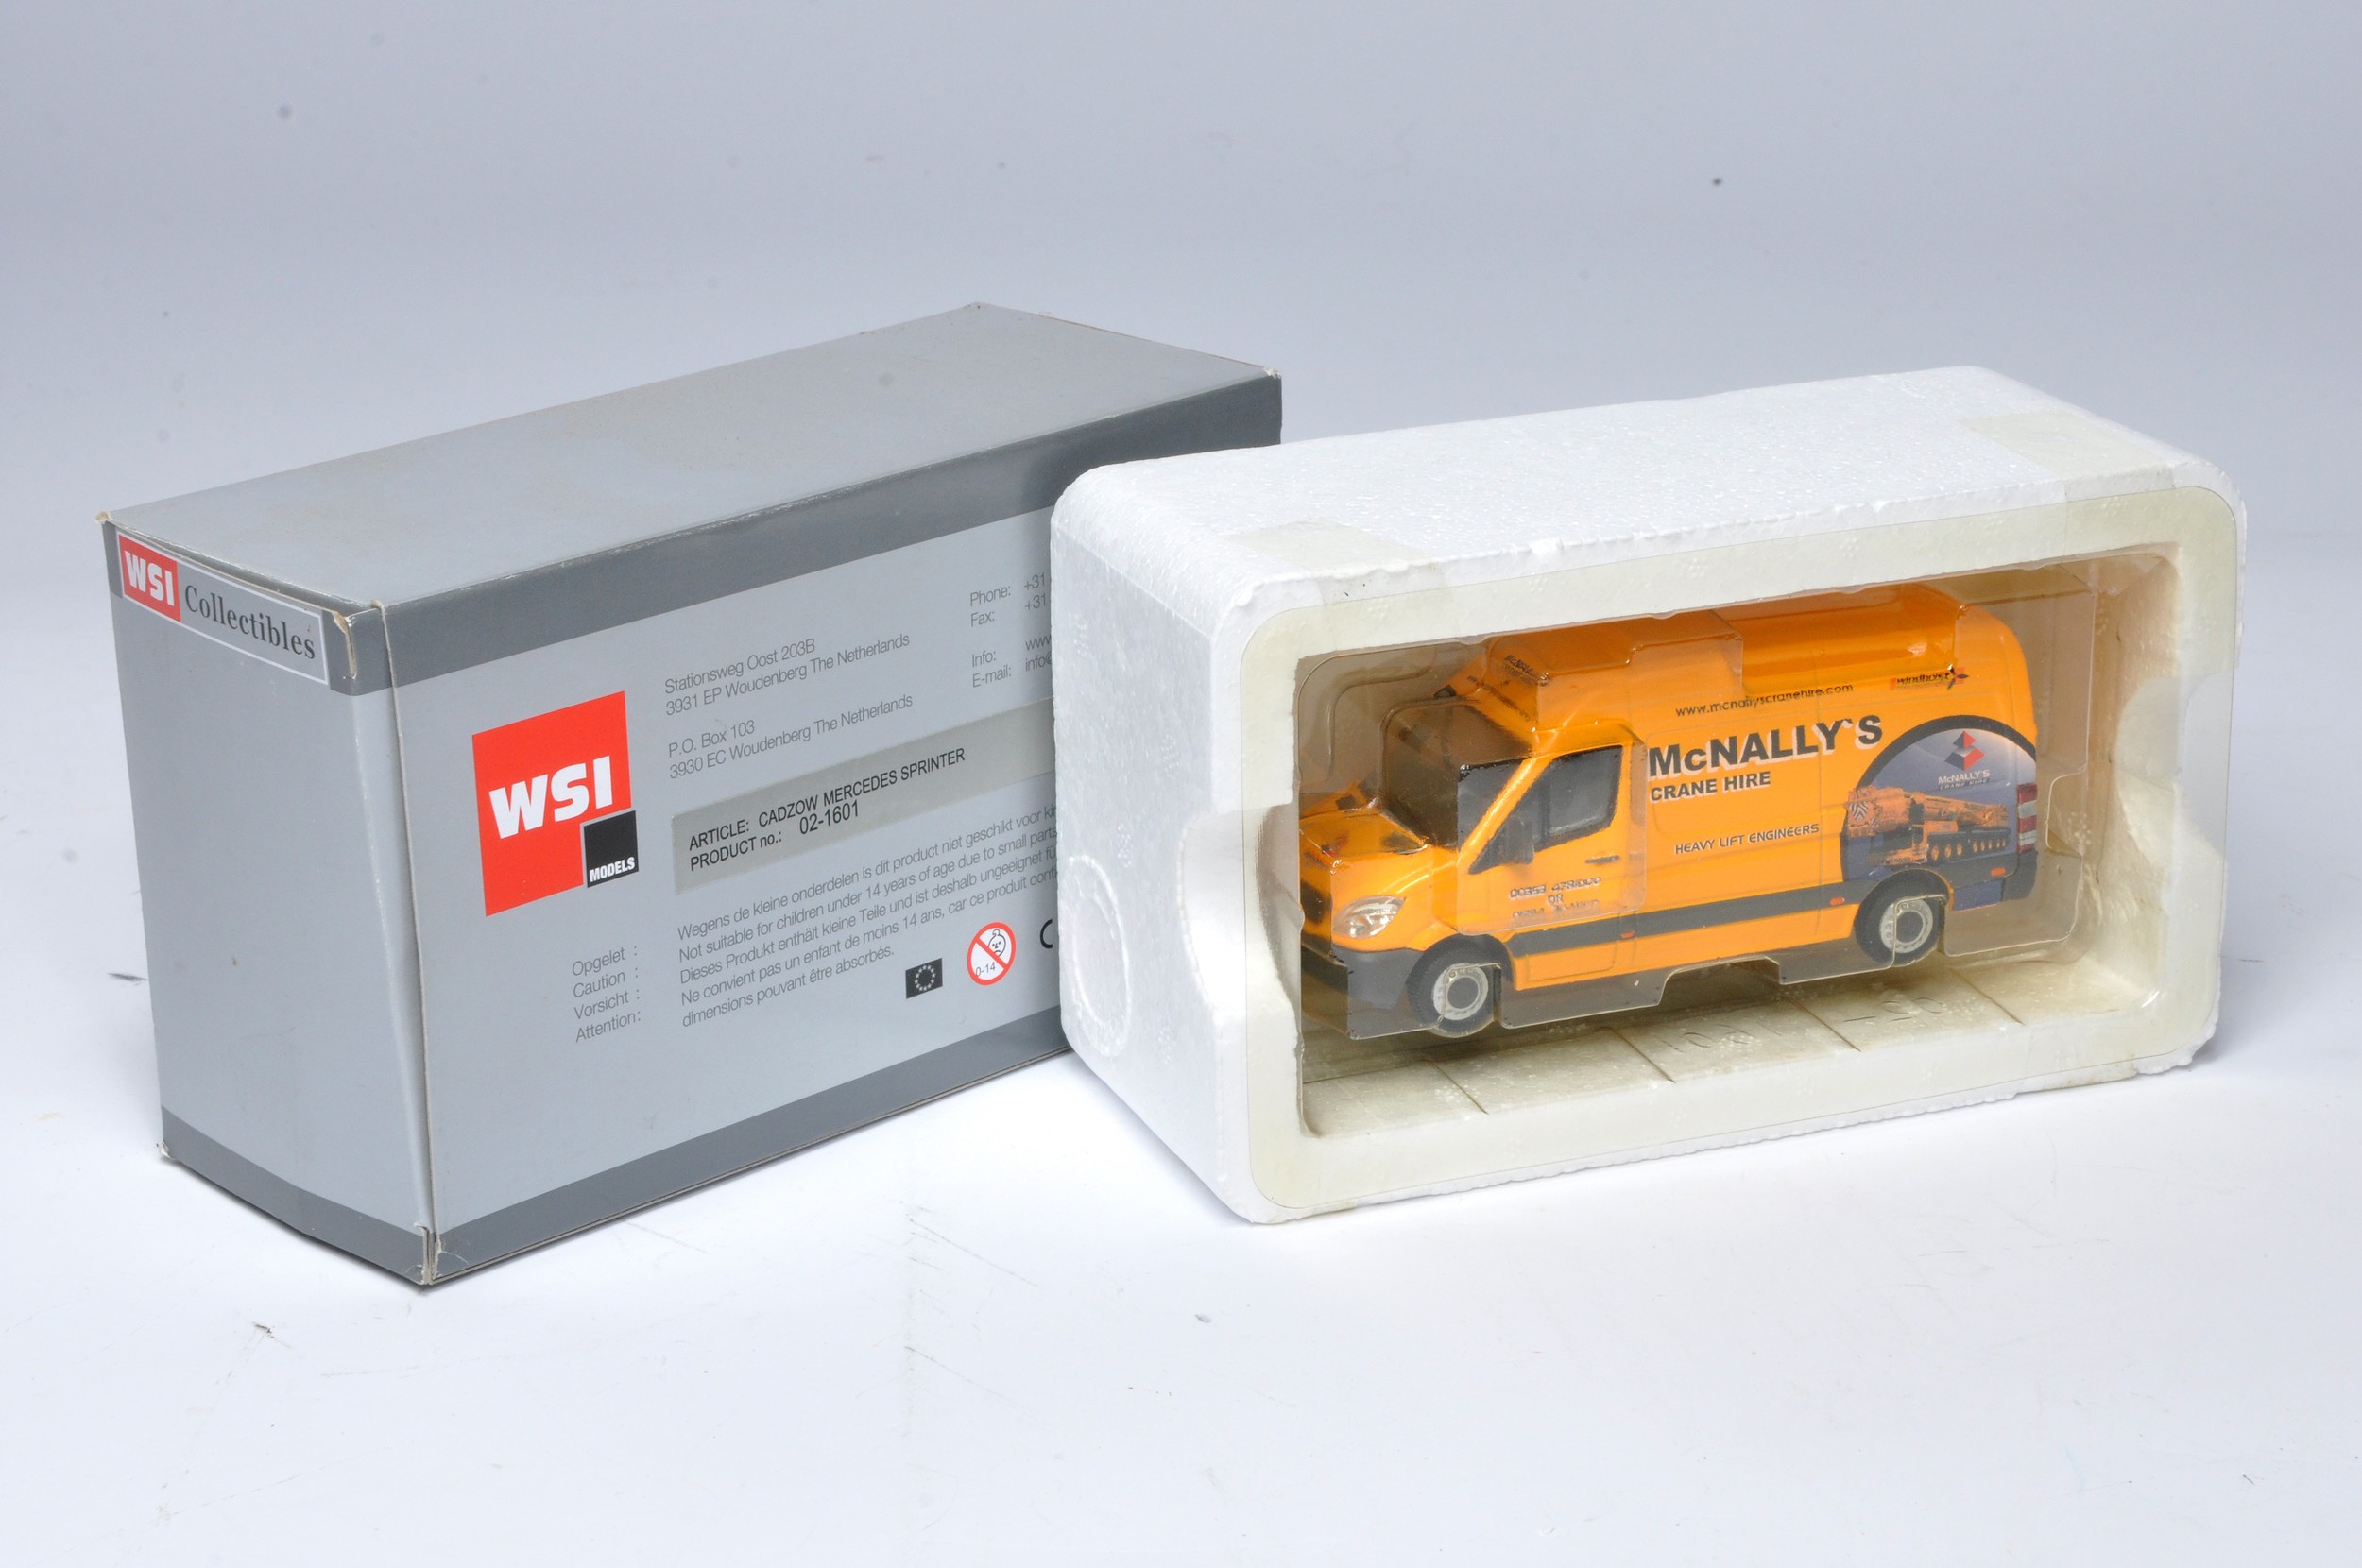 WSI 1/50 diecast model truck issue comprising Mercedes Sprinter Van in the livery of McNallys. Looks